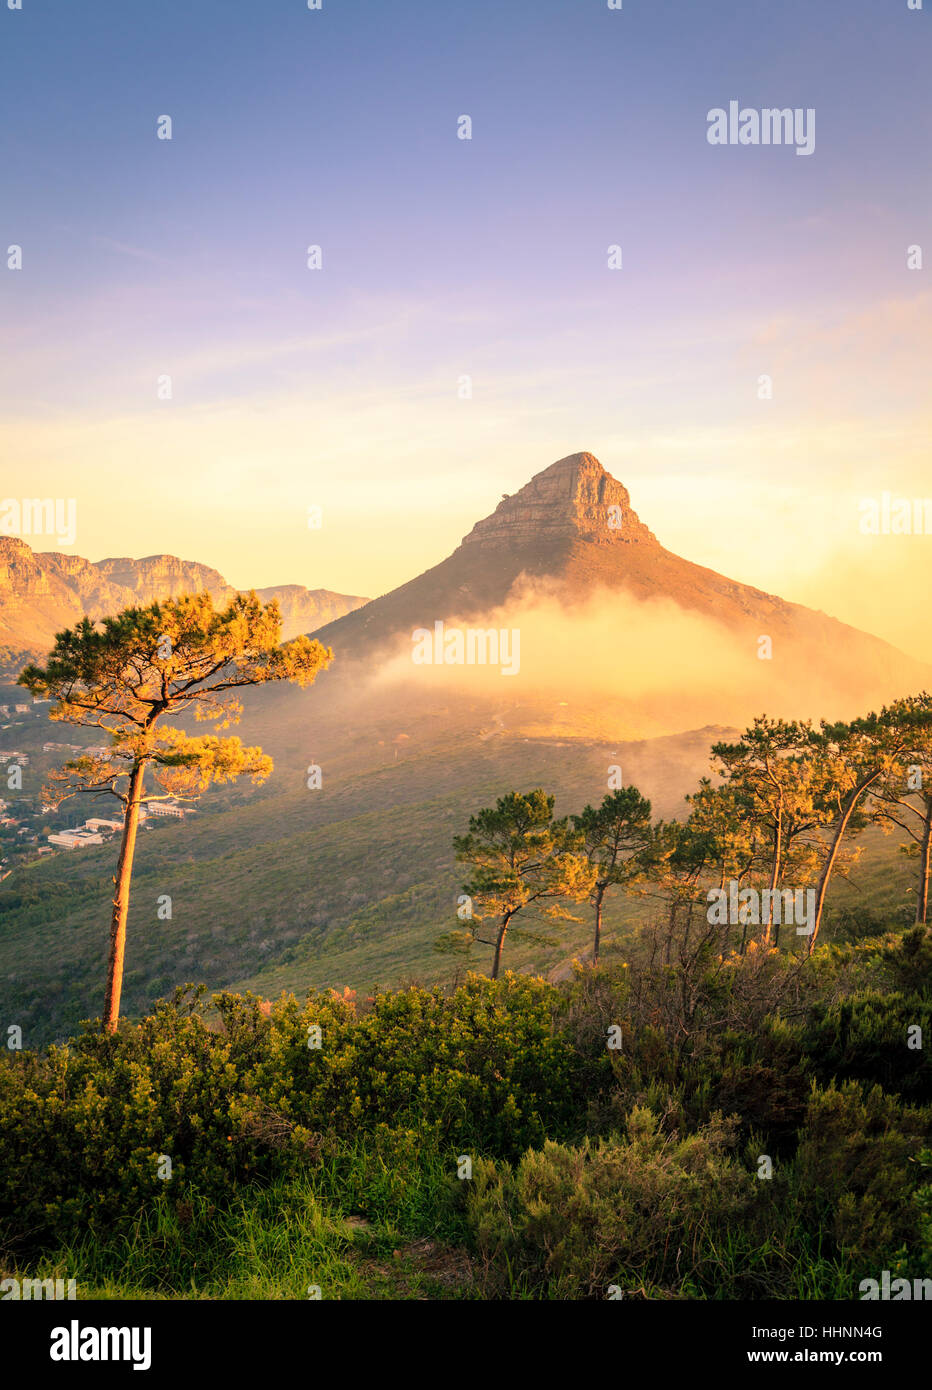 Lions Head Mountain in Cape Town, South Africa Stock Photo